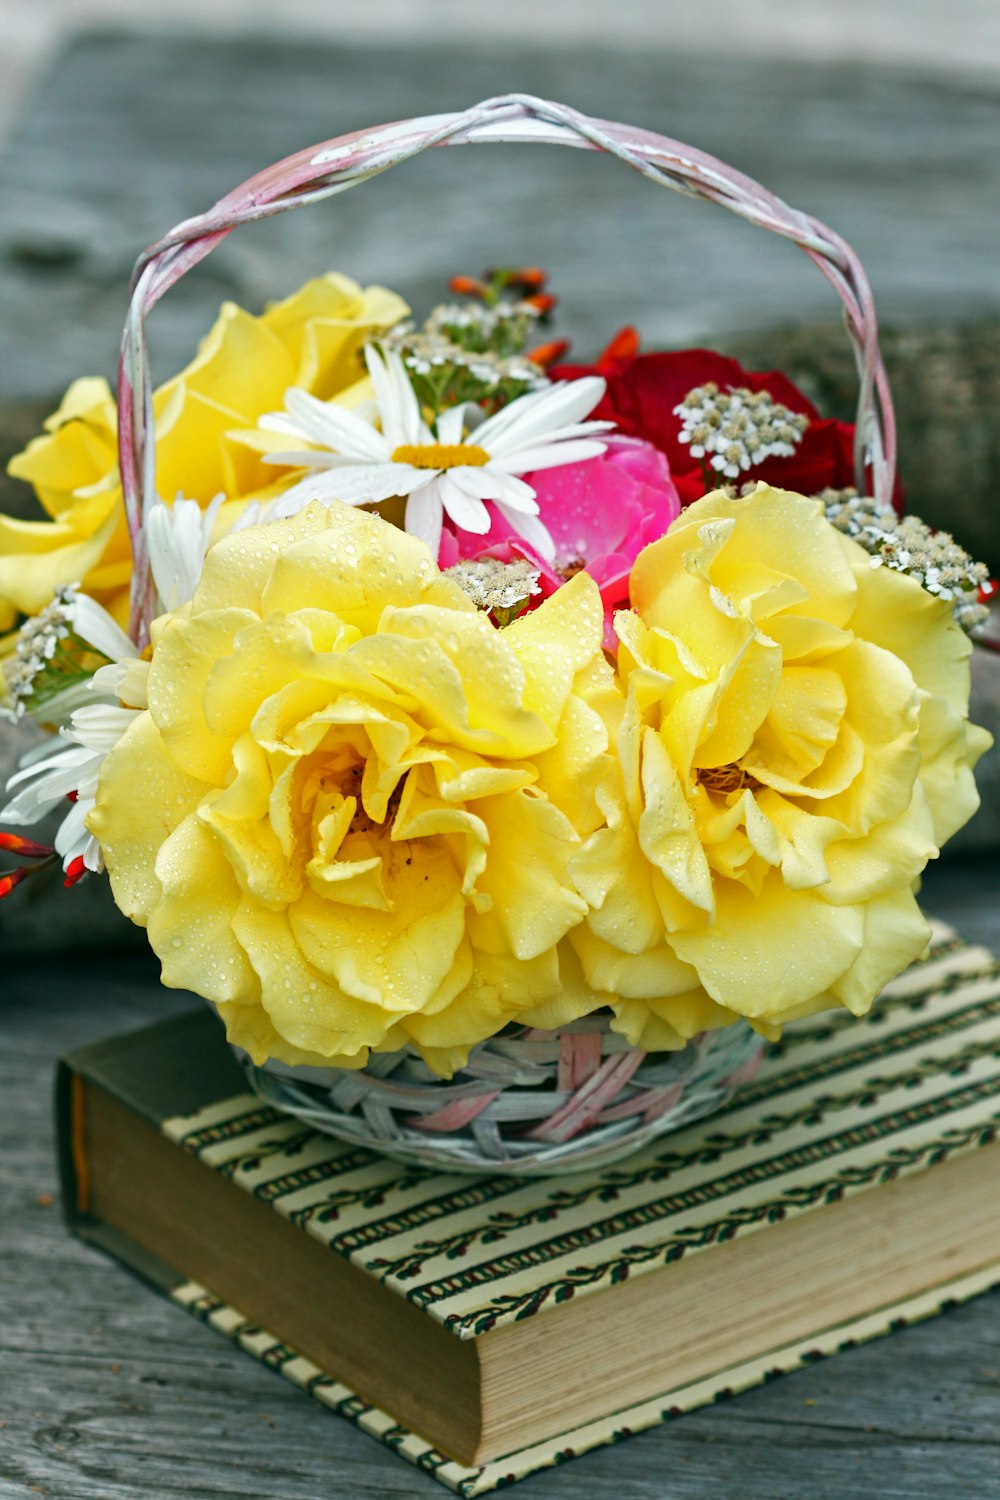 yellow rose flower in basket on book